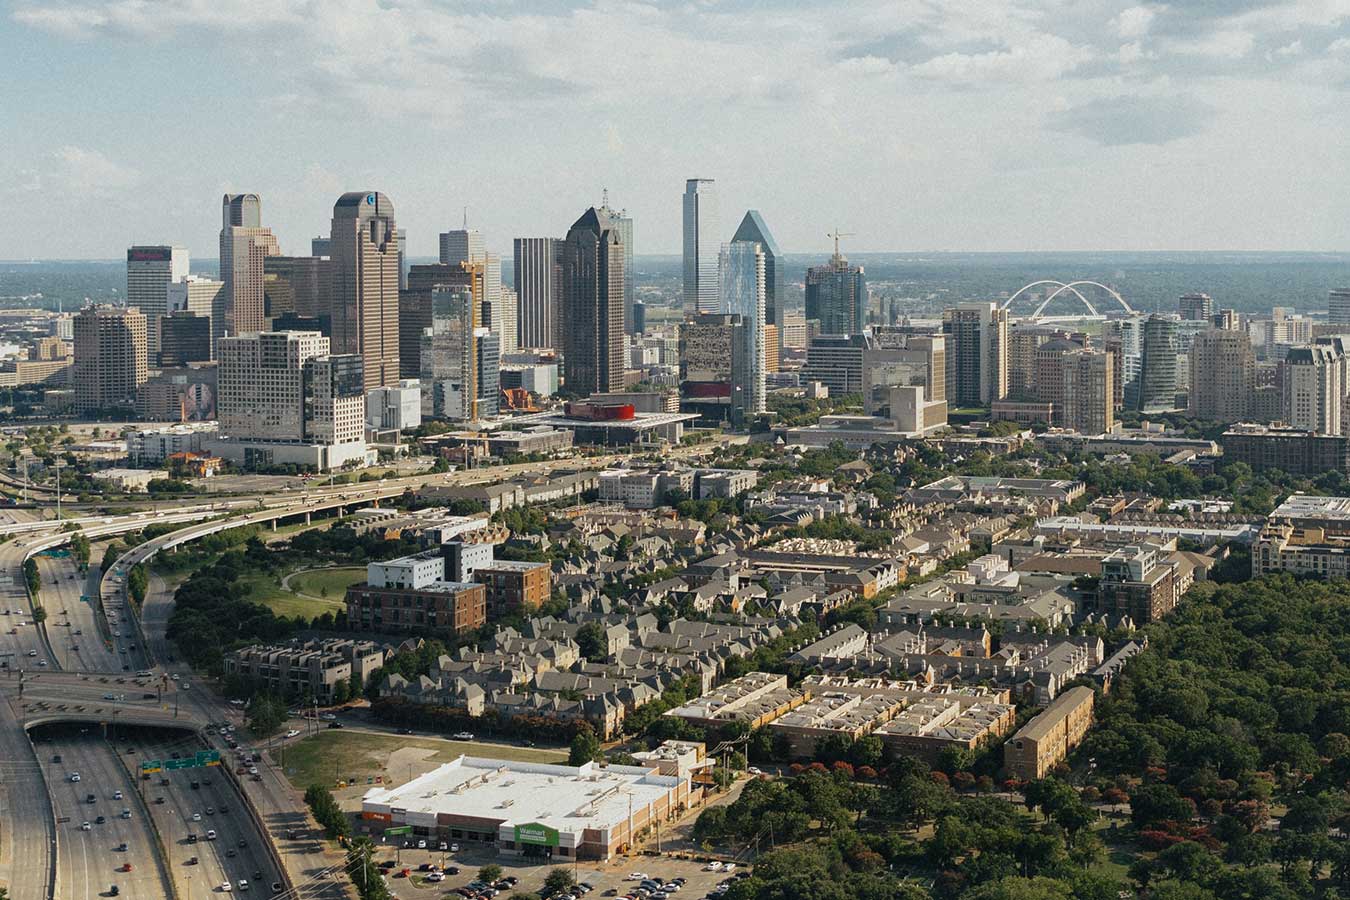 Panoramic view of downtown Dallas